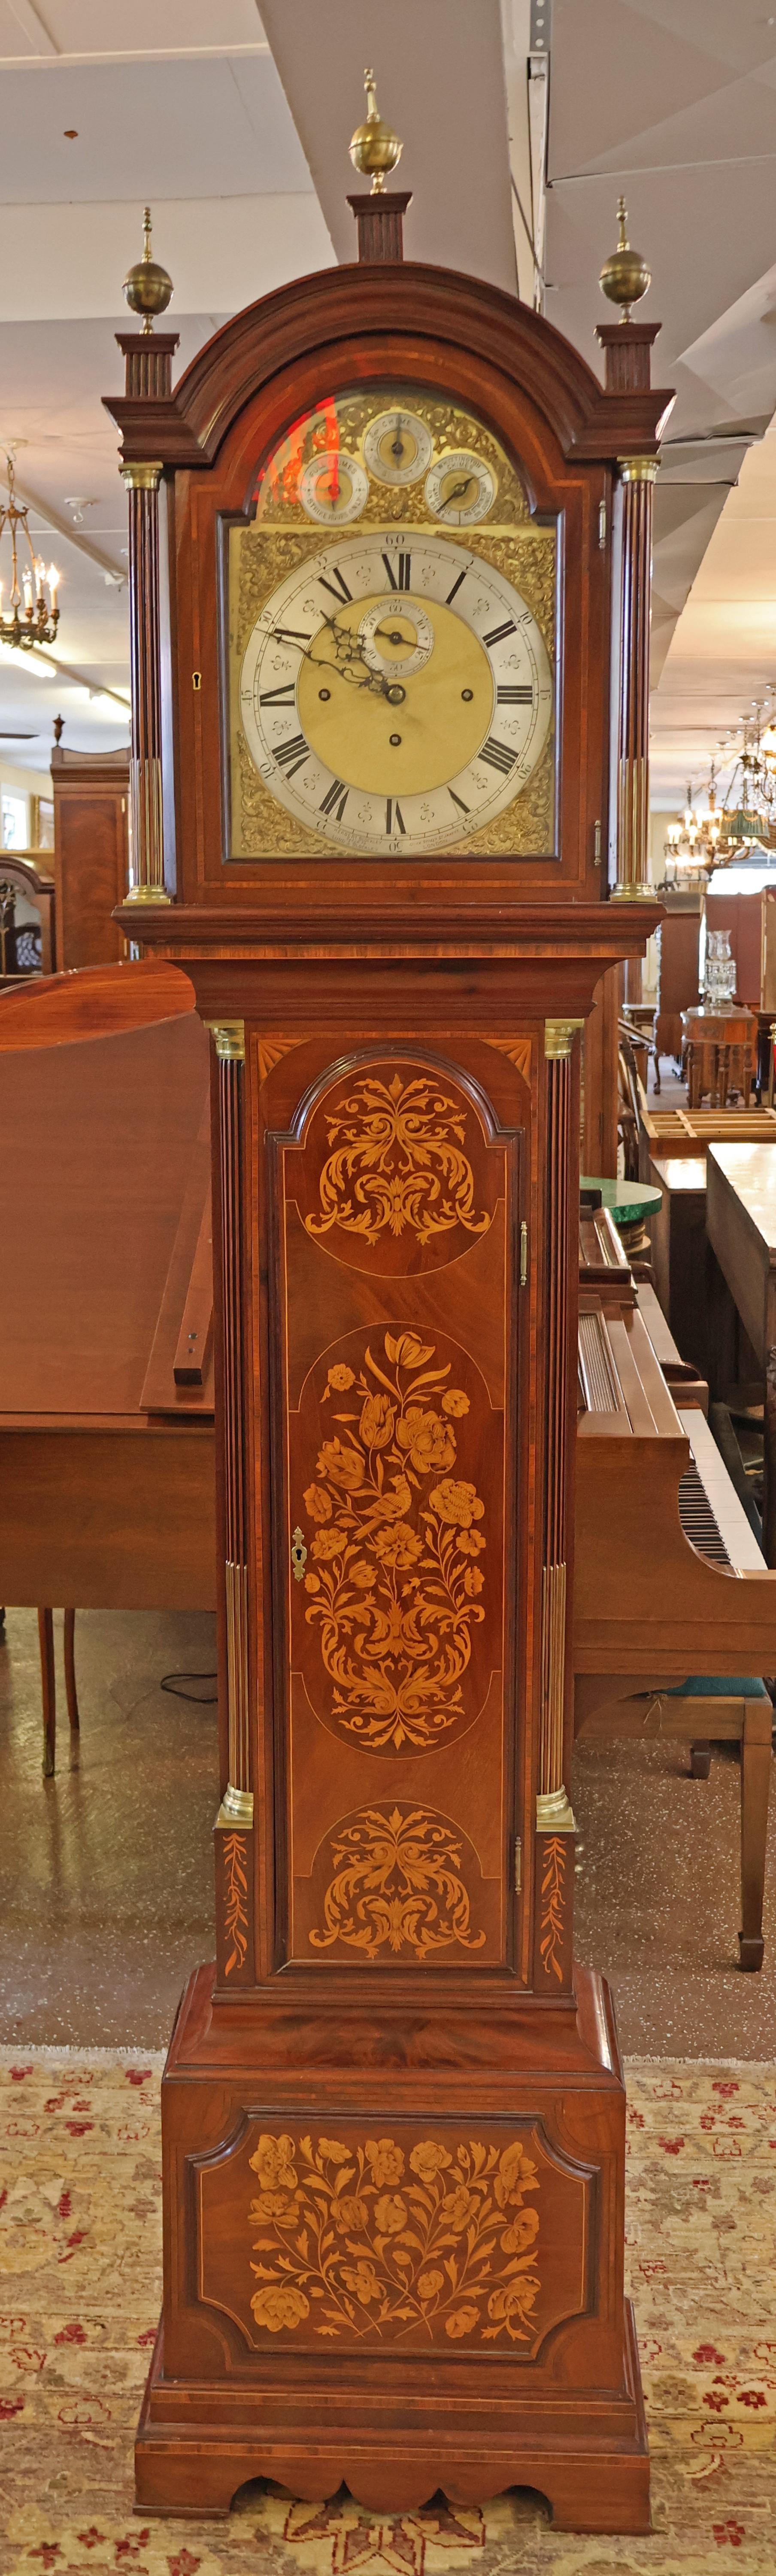 ​Herbert Blockley London Musical 19th Century Inlaid Tall Case Grandfather Clock

Dimensions : 94.5